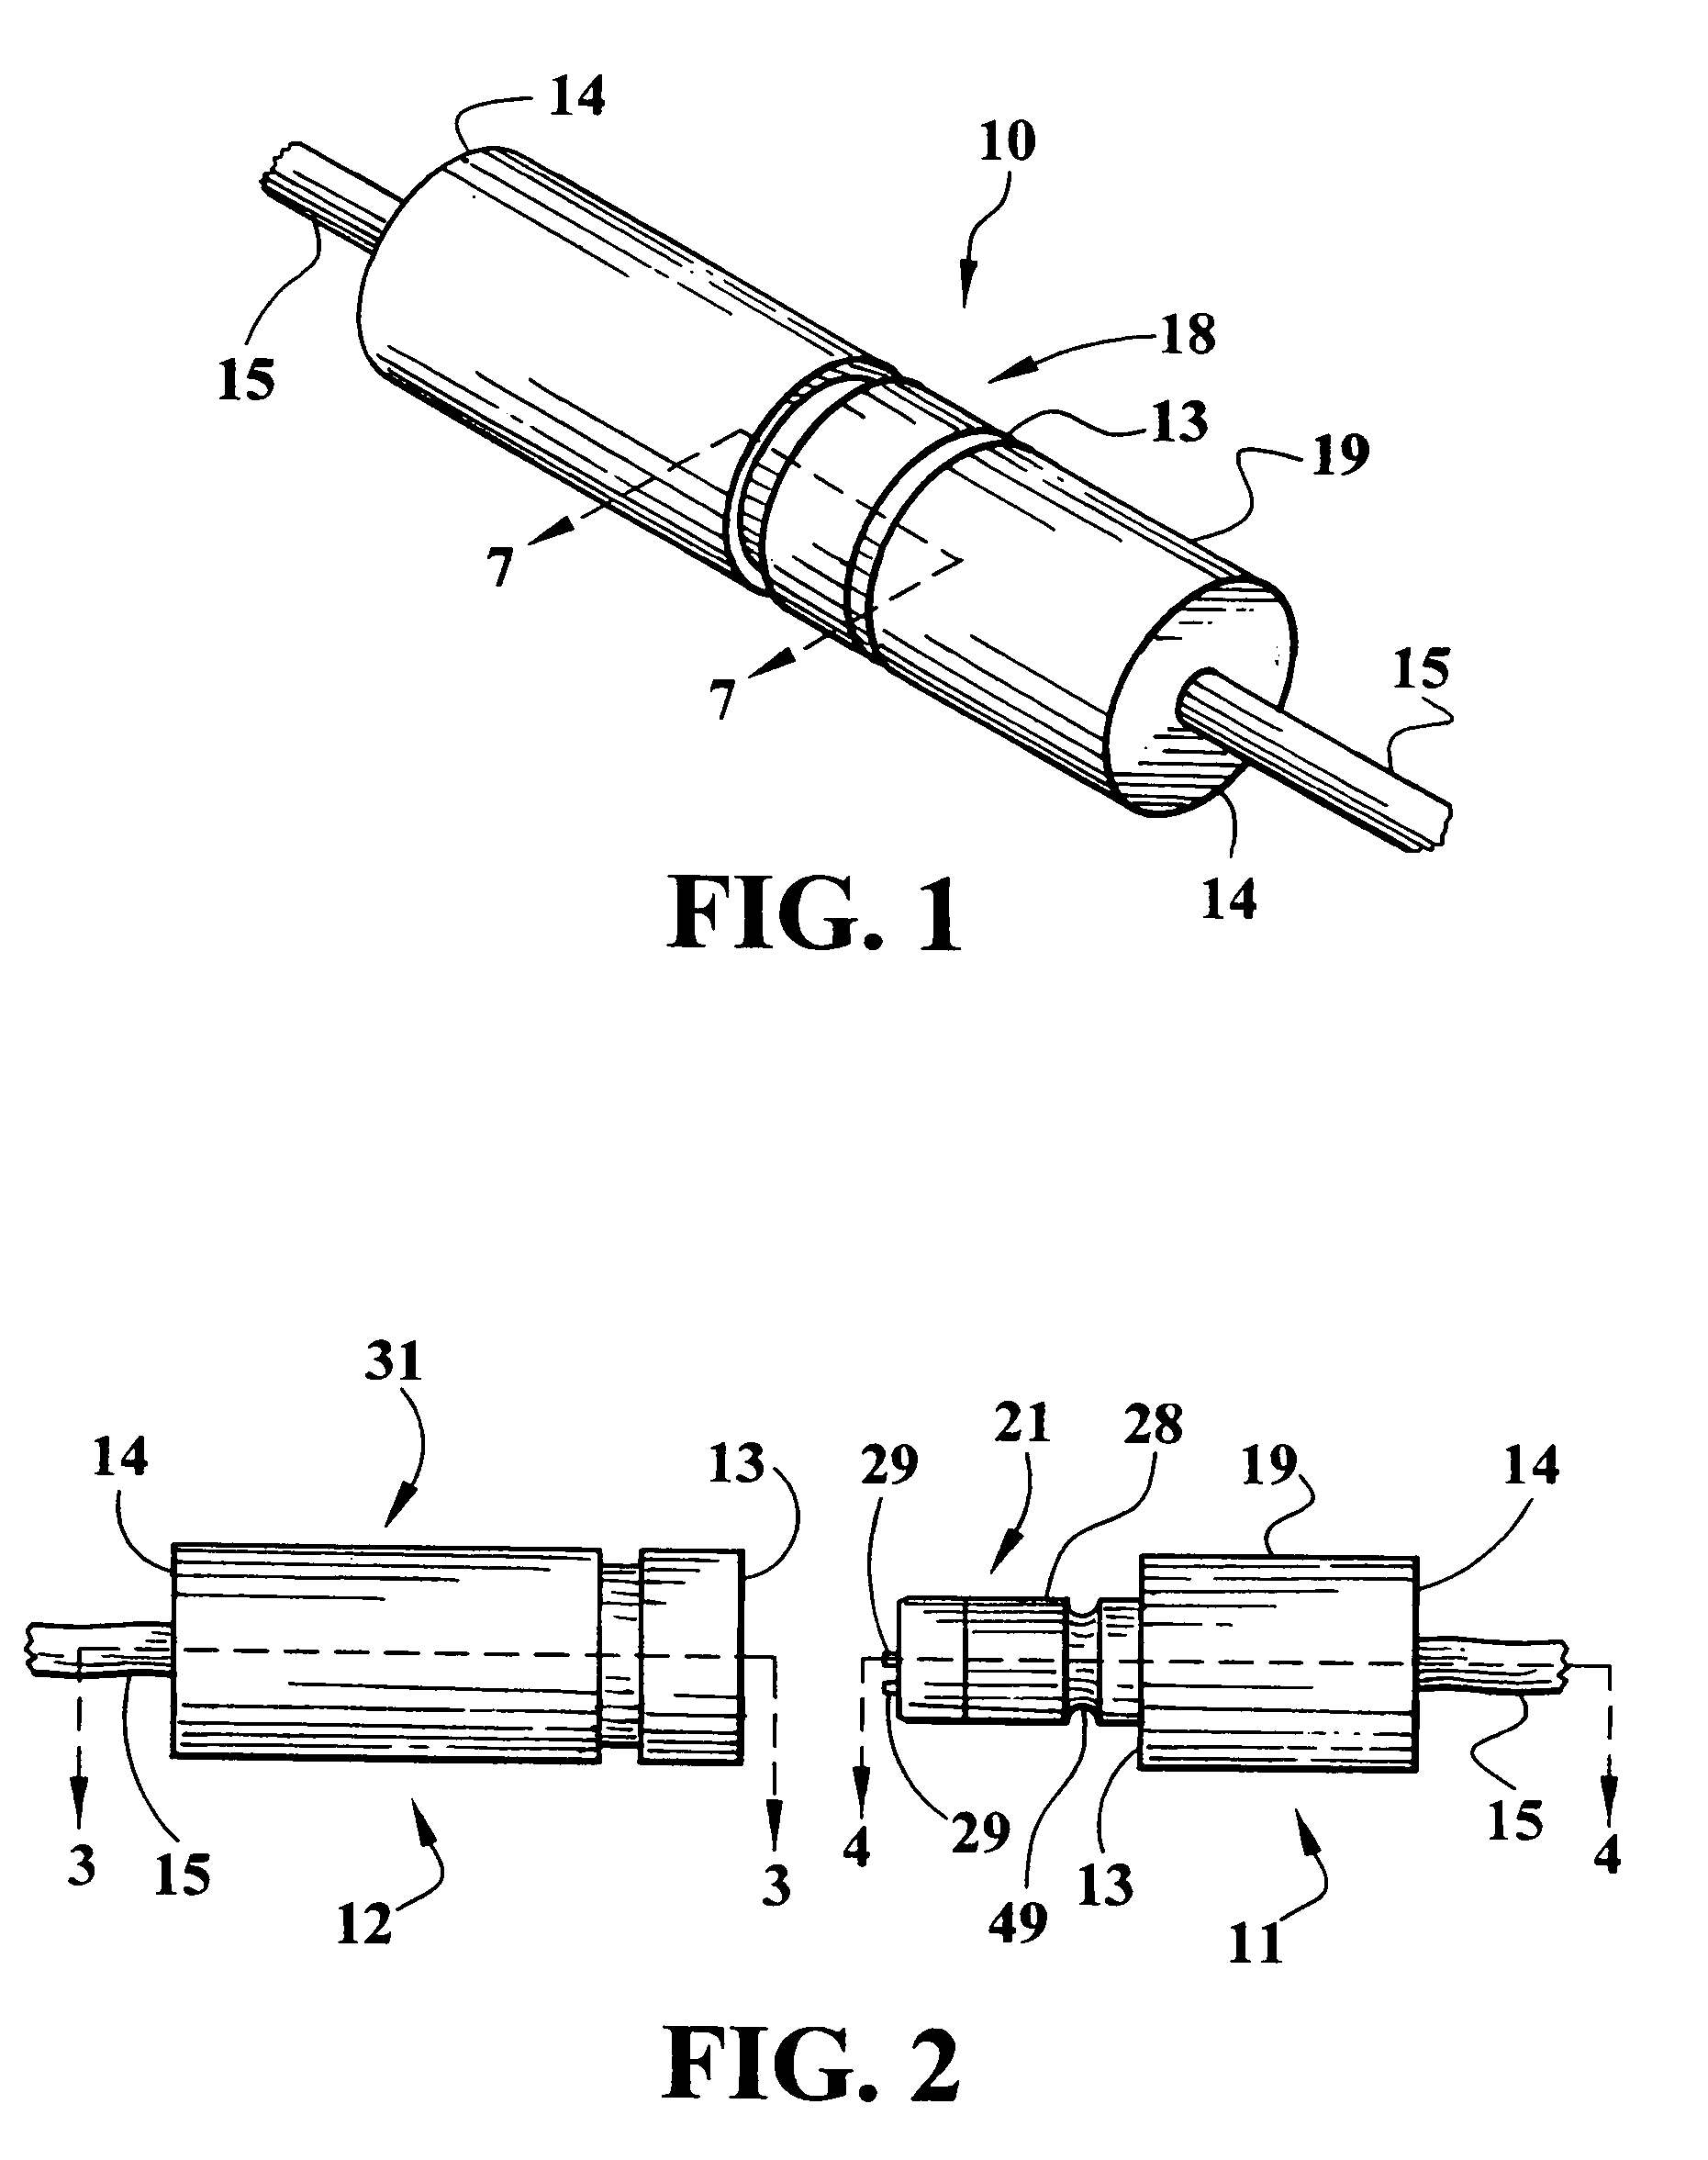 Self-locking rotatable electrical coupling